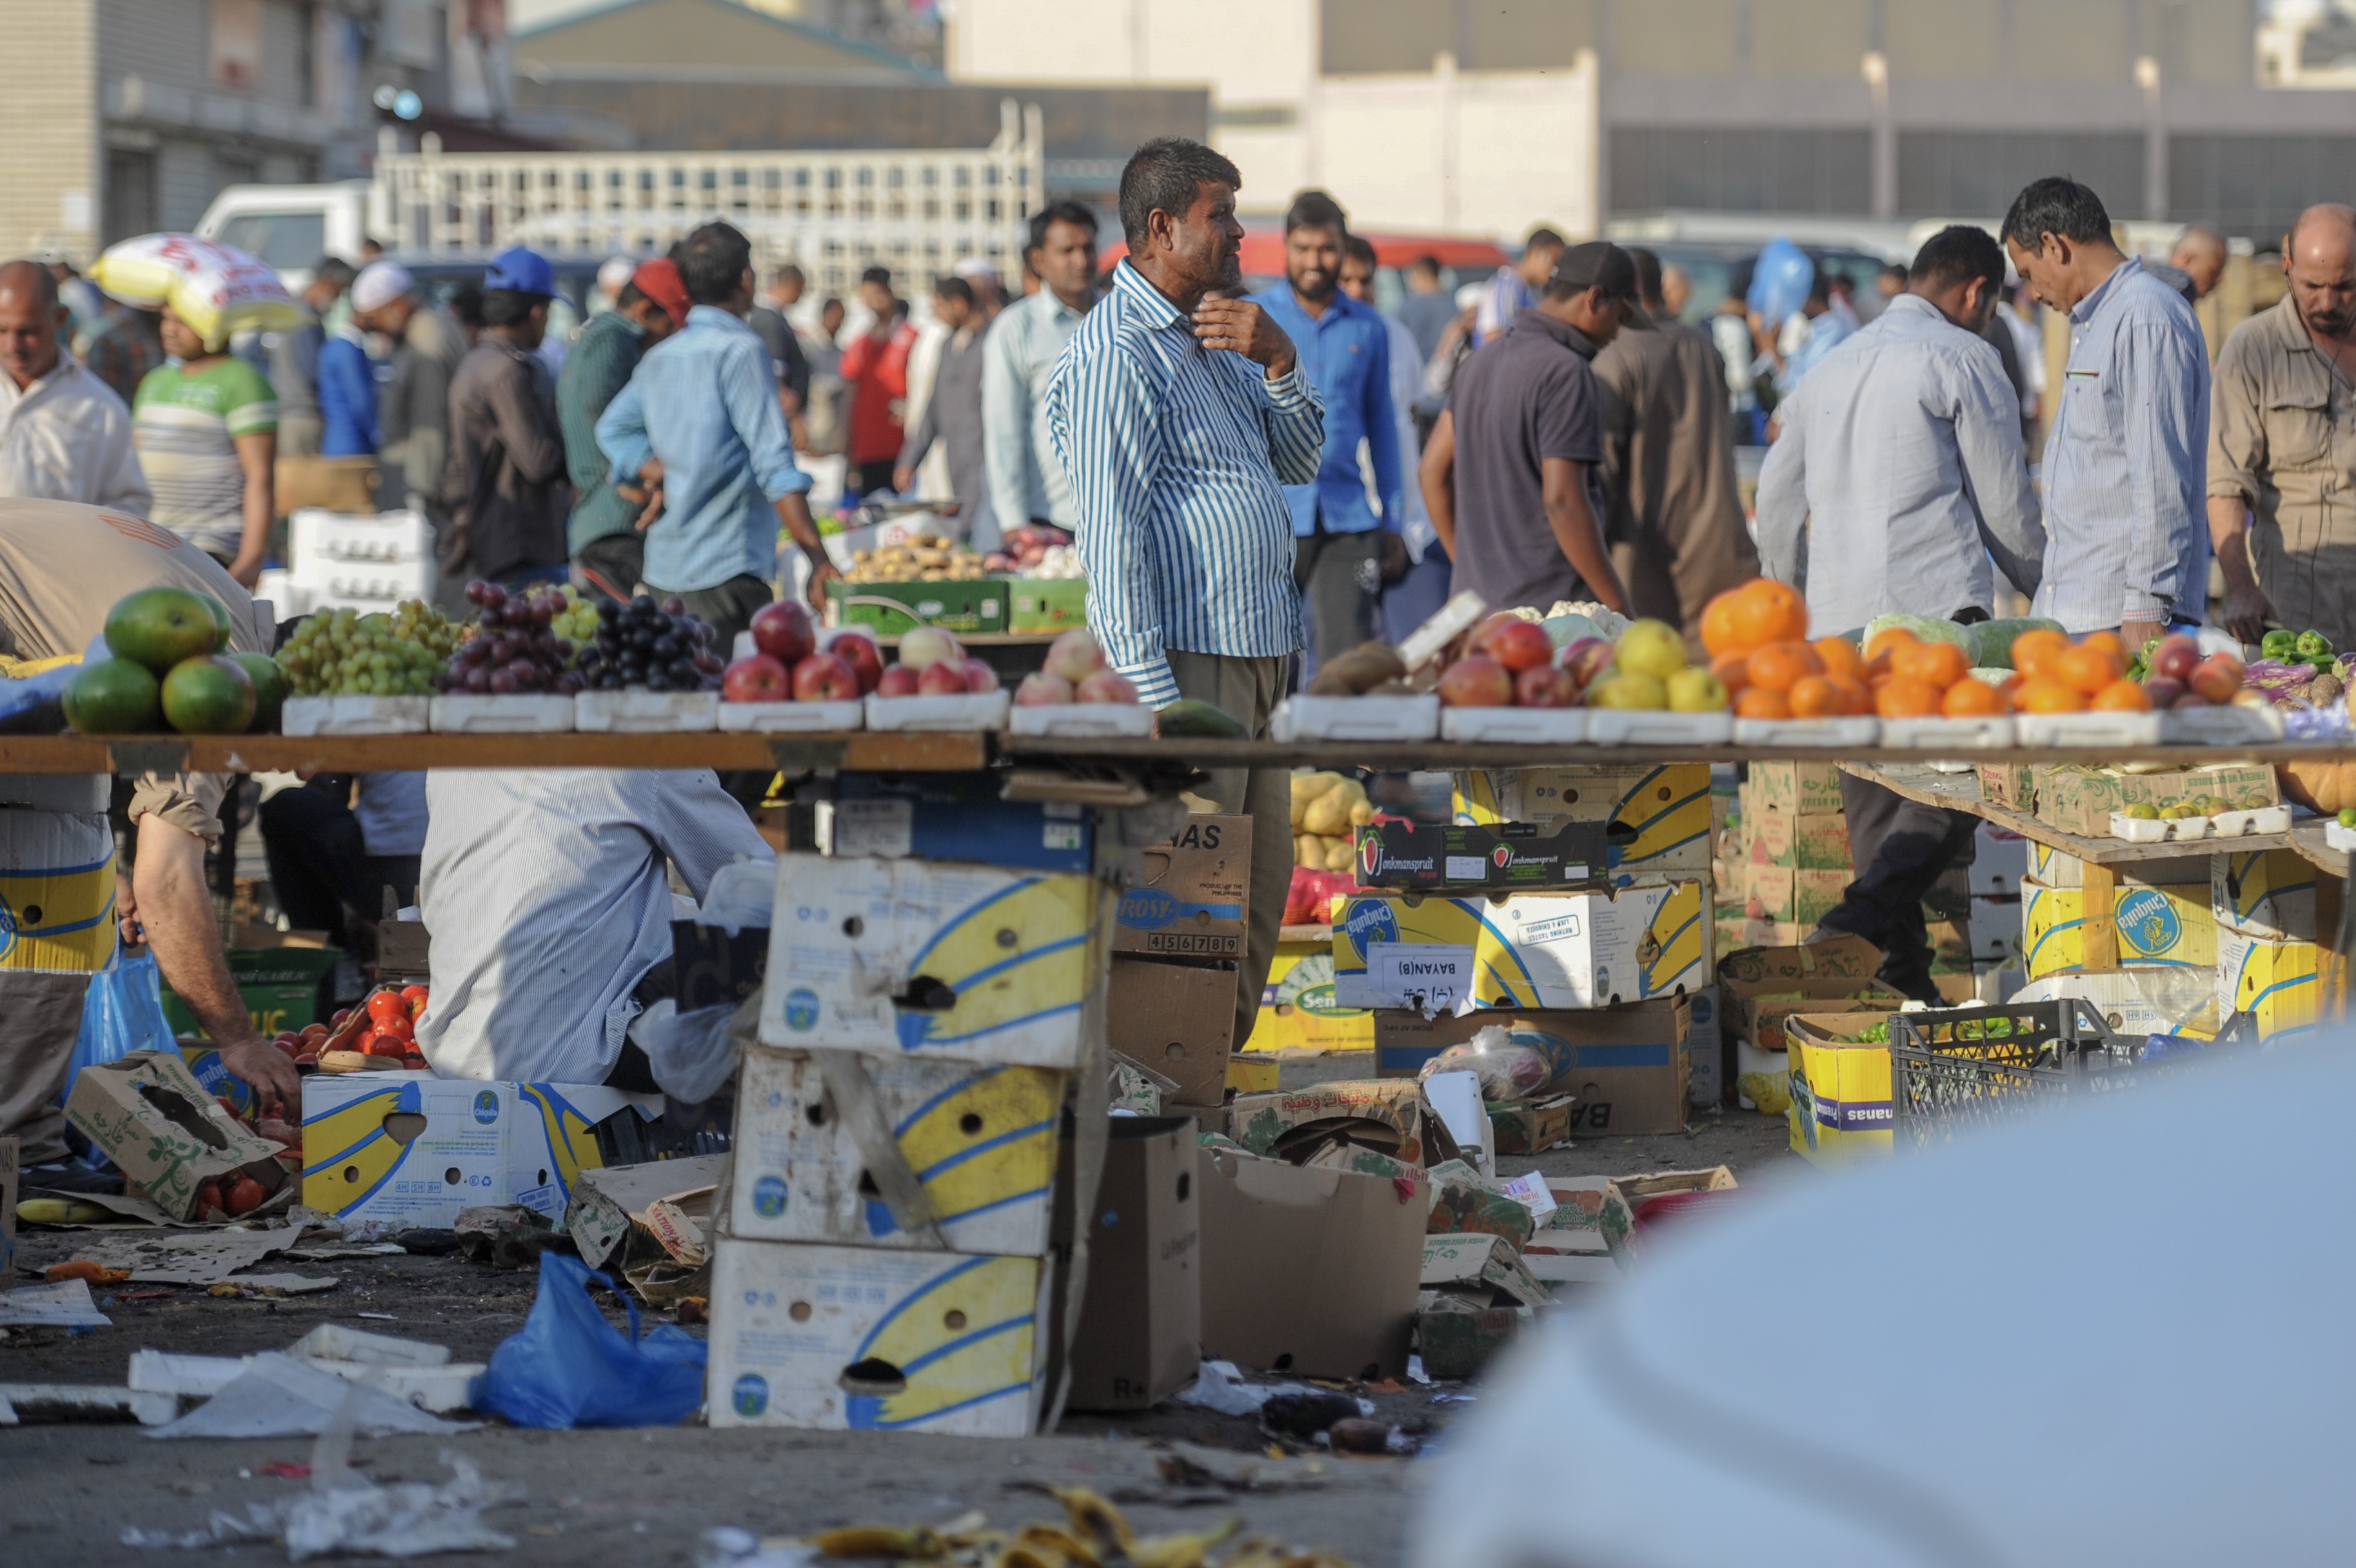 The phenomenon of street vendors on main roads and subways and at squares and marketplaces causes negative hygienic, economic and social effects